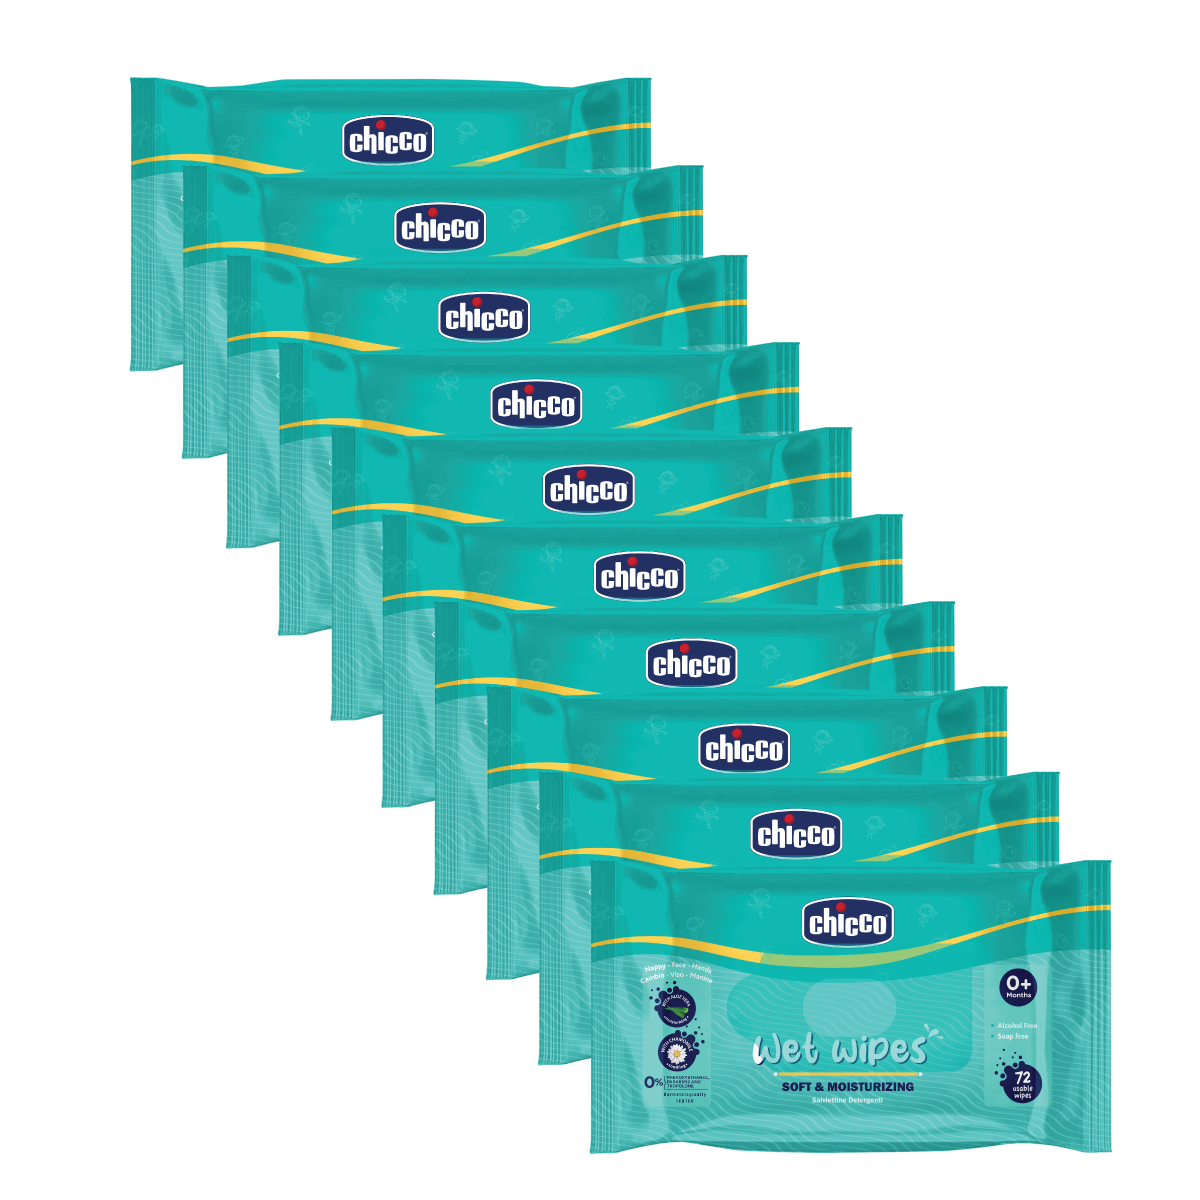 Chicco Wetwipes Pack of 6-720 PCS